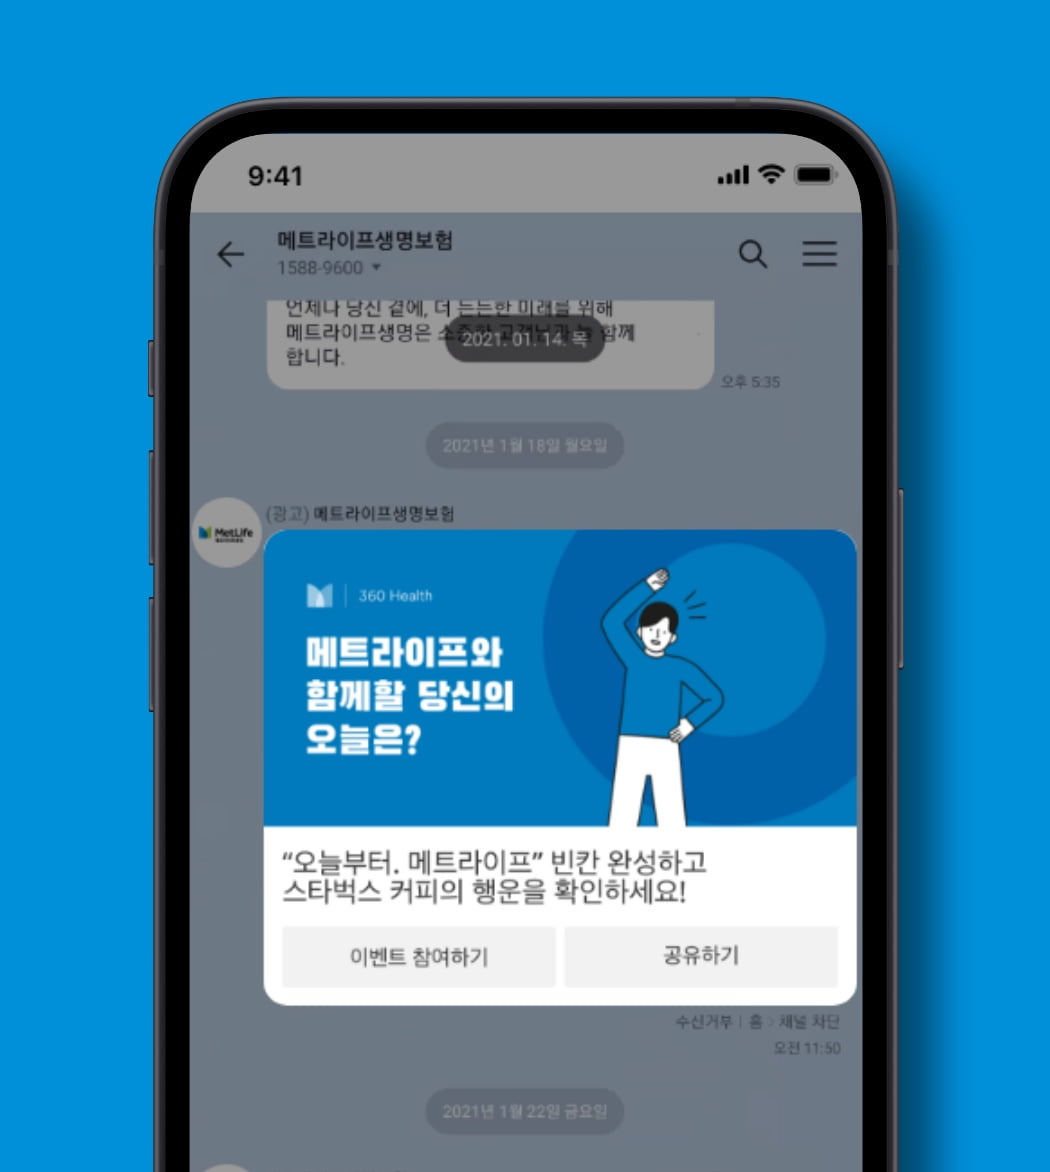 Phone screen showing promotion with illustration on Kakao.